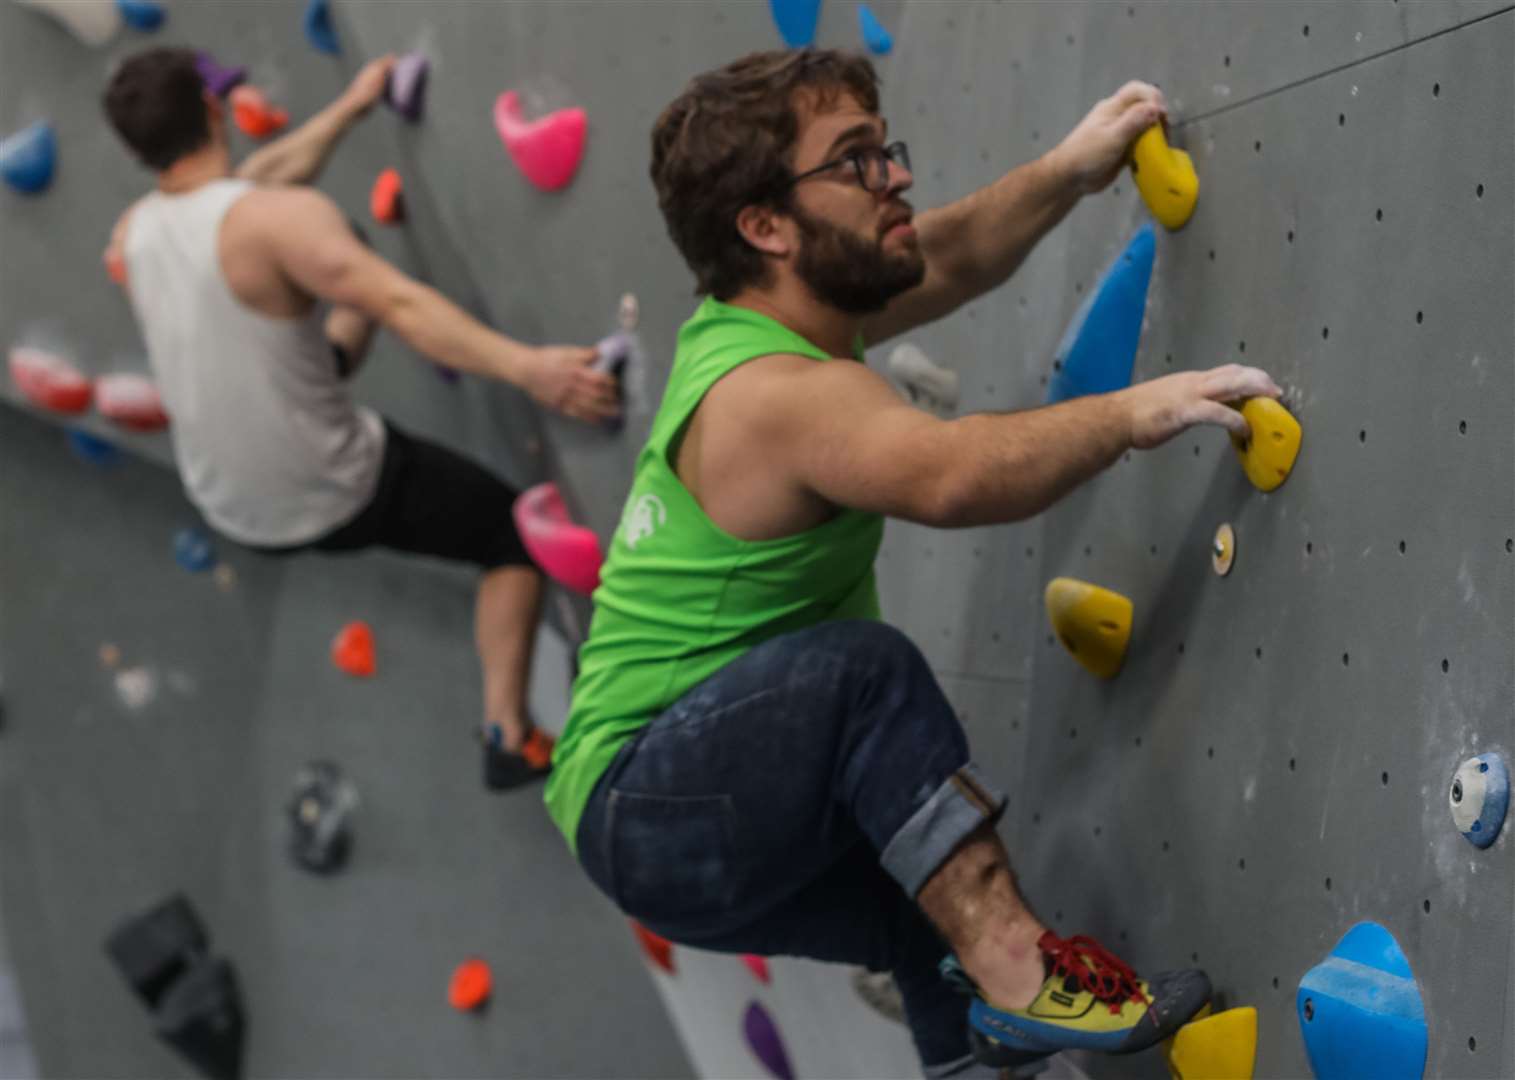 The gym has a range of different routes to climb, from beginner through to advanced.